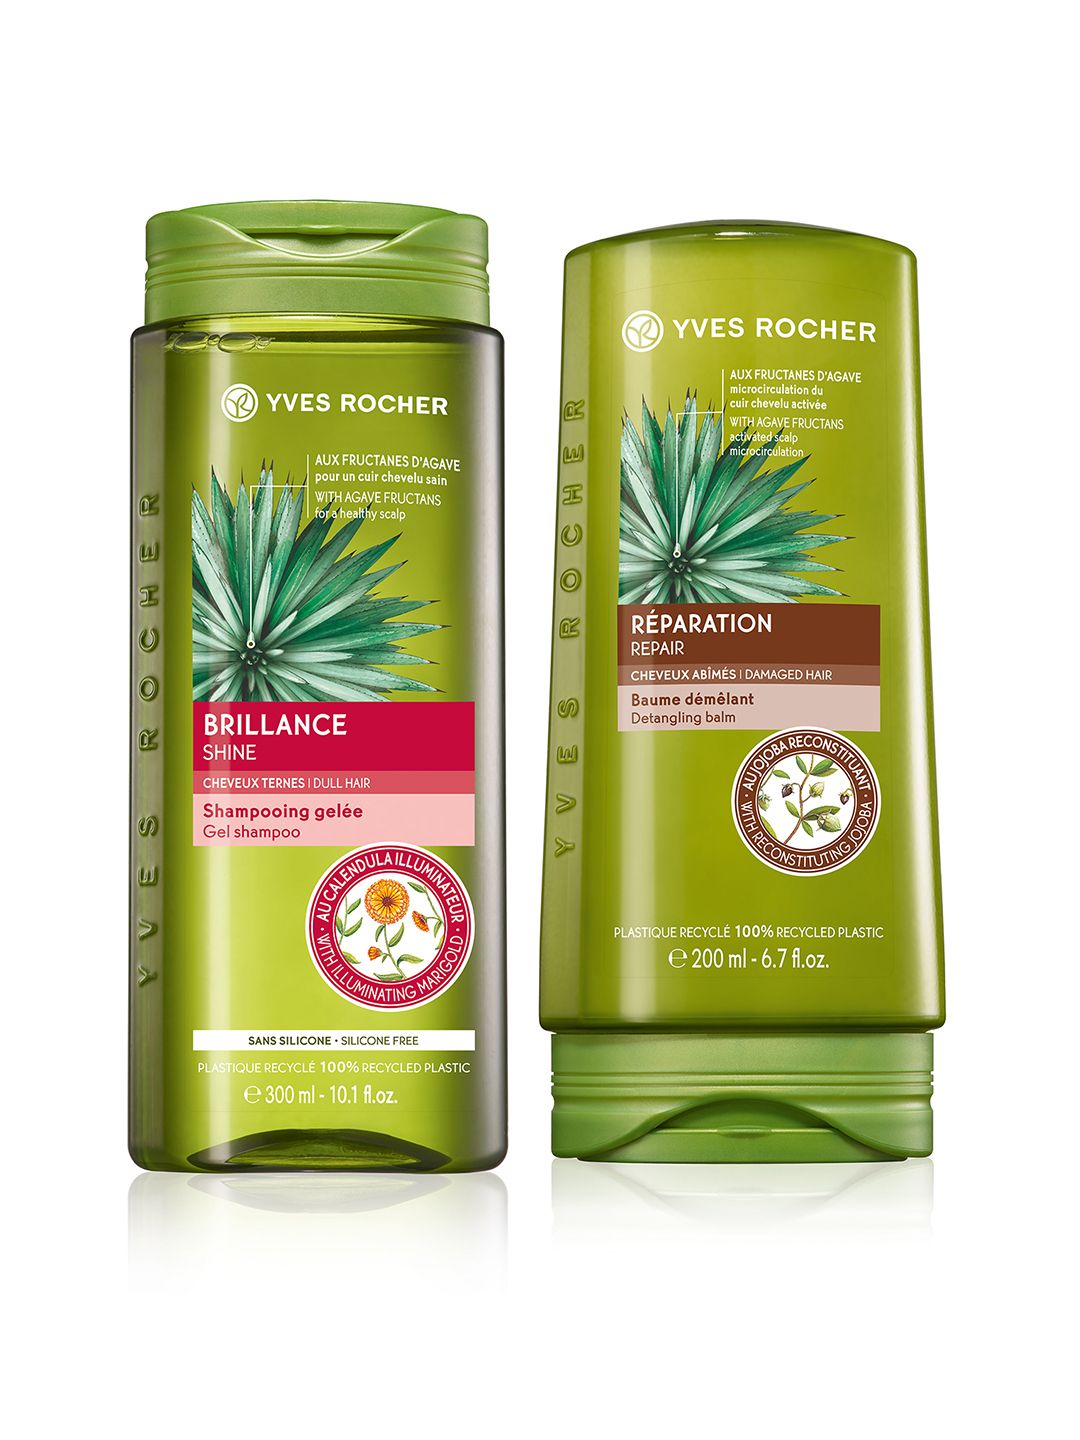 YVES ROCHER Set of Sustainable Brilliance Shine Gel Shampoo & Repair Detangling Balm Price in India